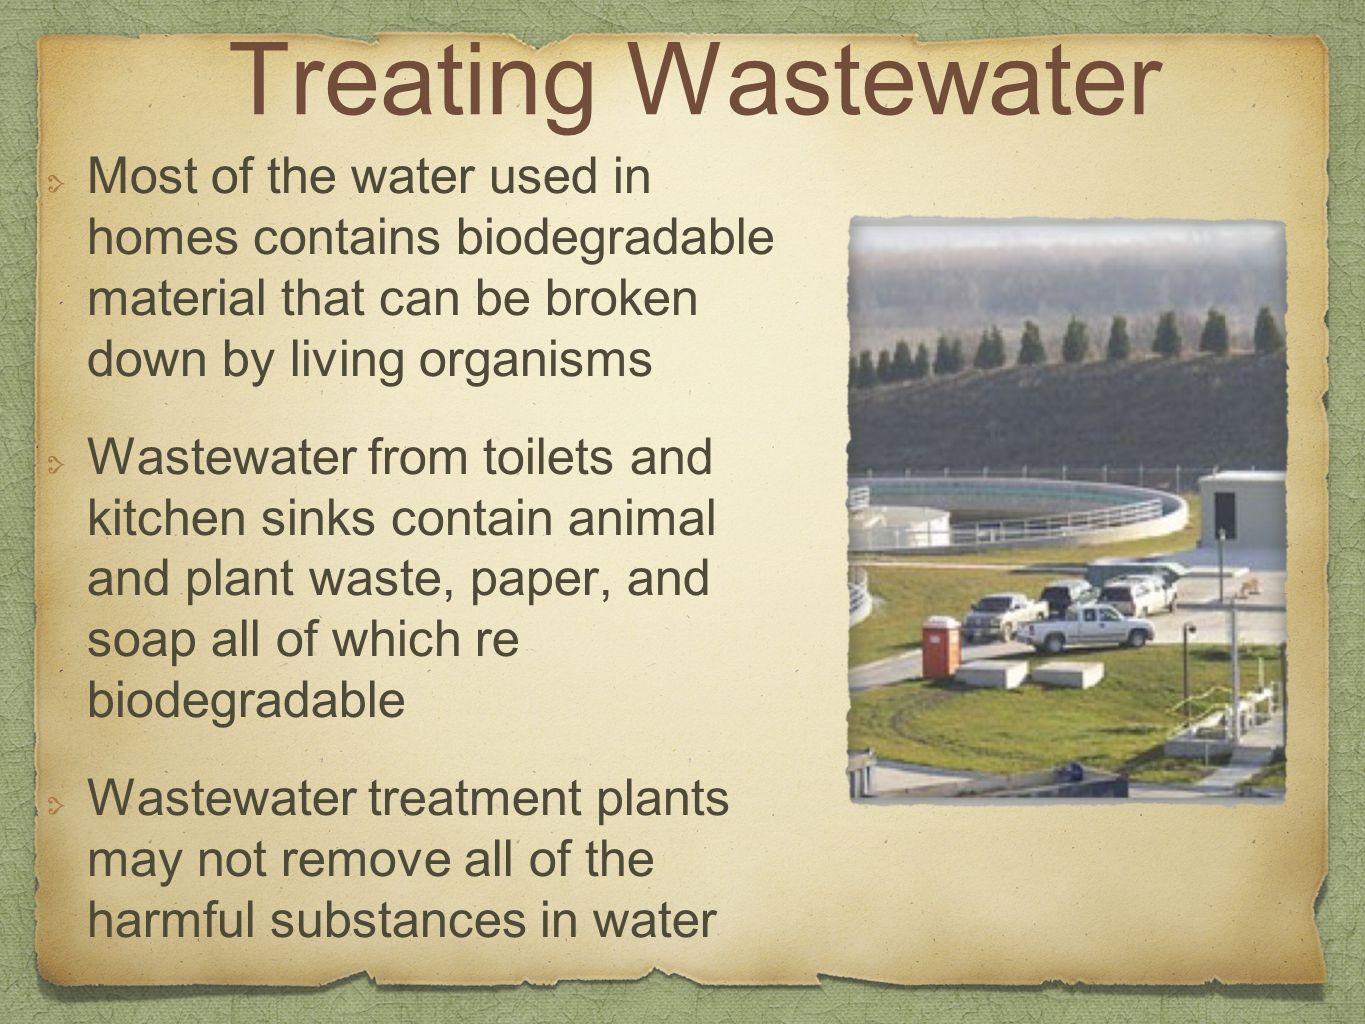 Treating Wastewater Most of the water used in homes contains biodegradable material that can be broken down by living organisms.